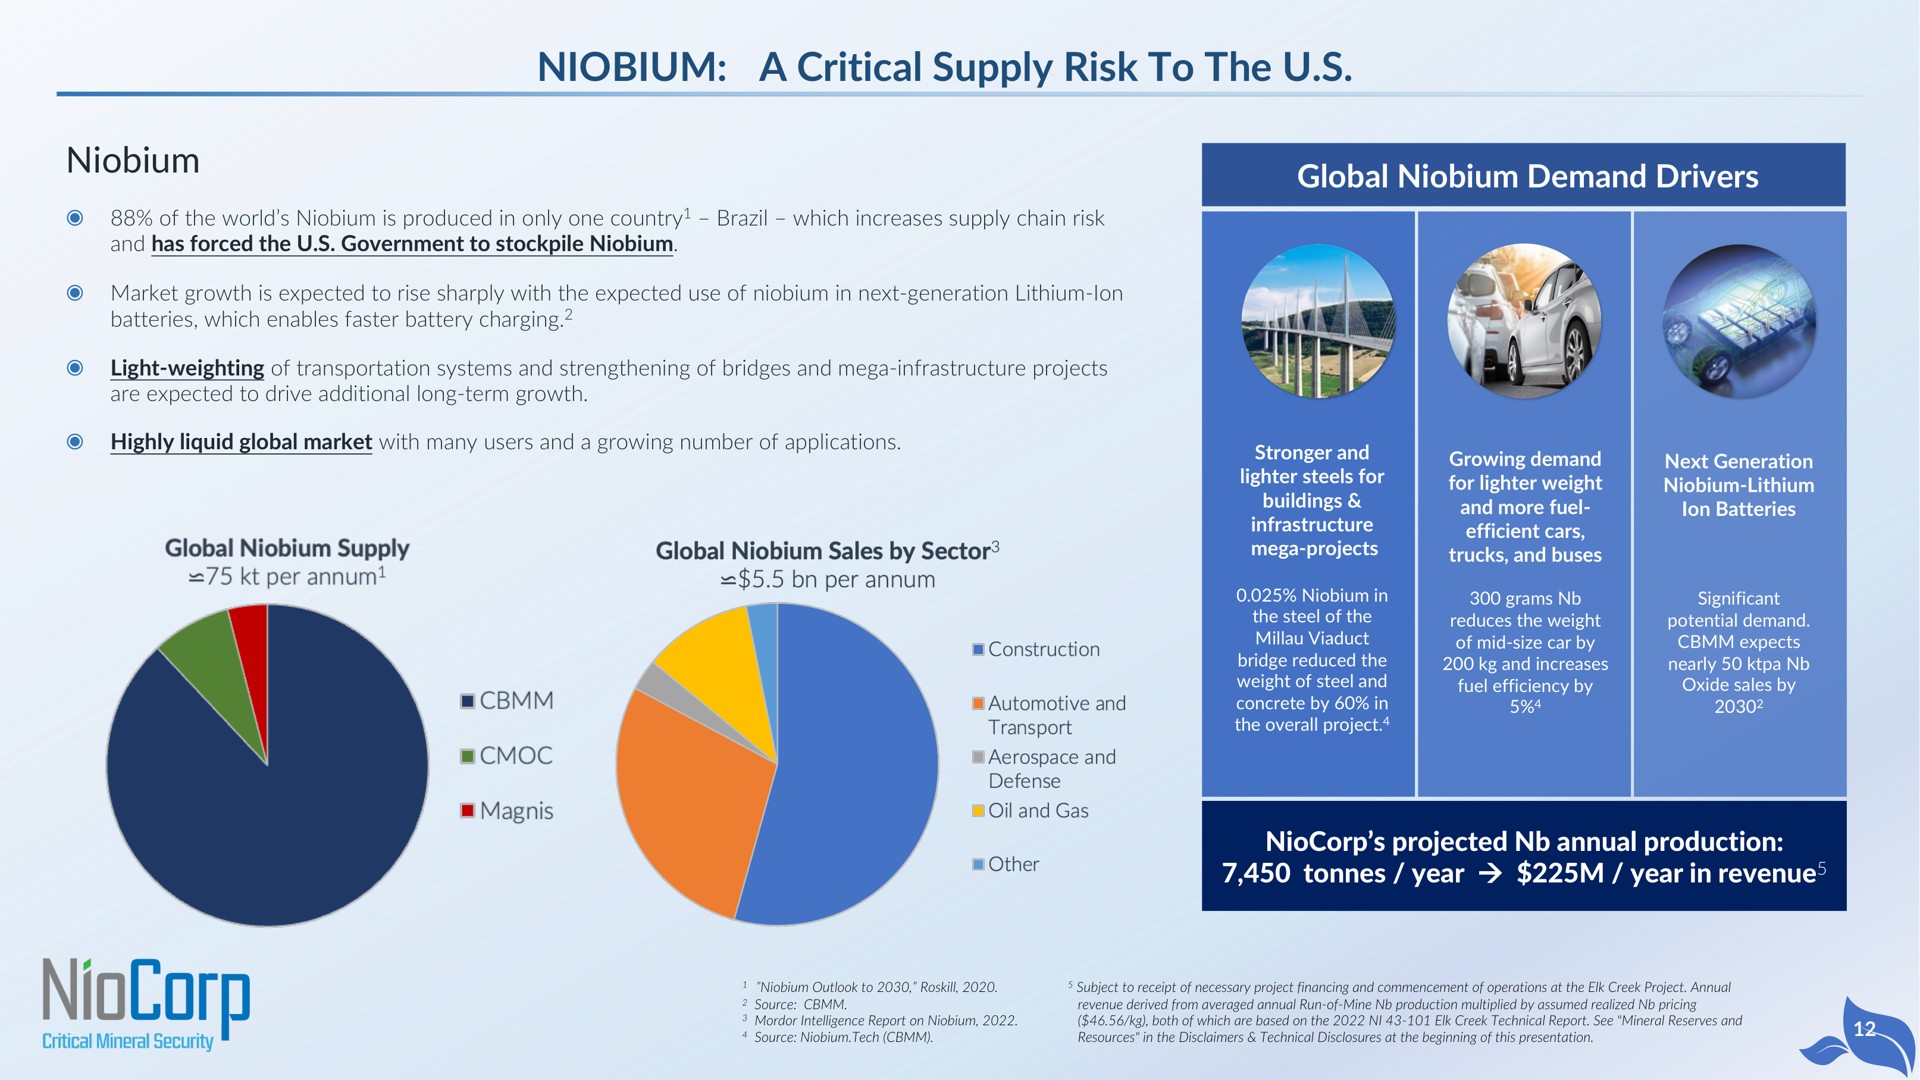 niobium a critical supply risk to the niobium global niobium demand drivers projected annual production year year in revenue | NioCorp